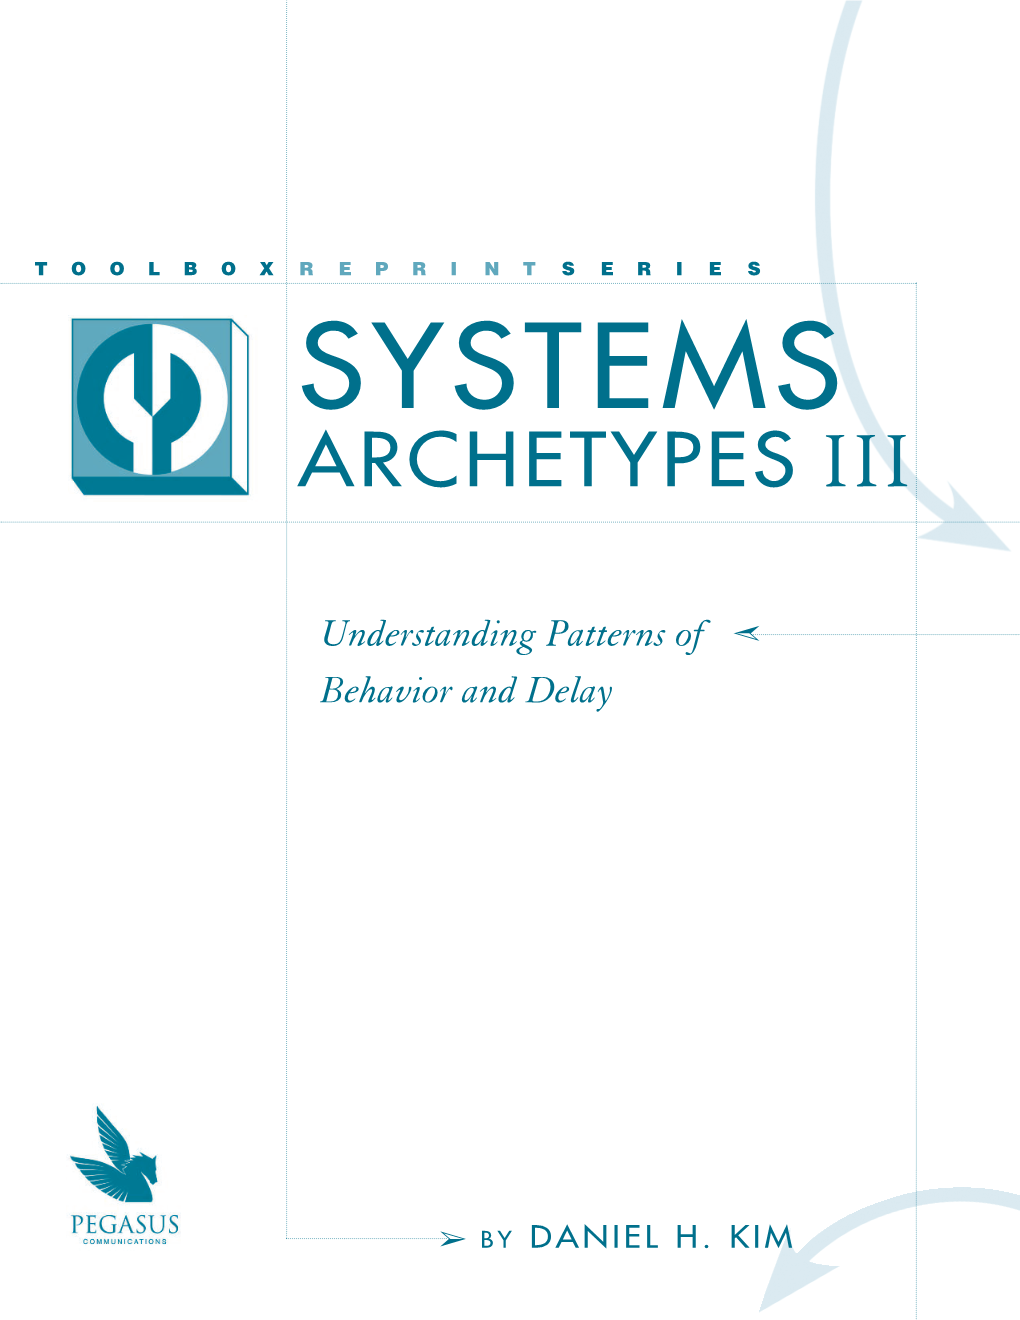 Systems Archetypes III: Understanding Patterns of Behavior and Delay